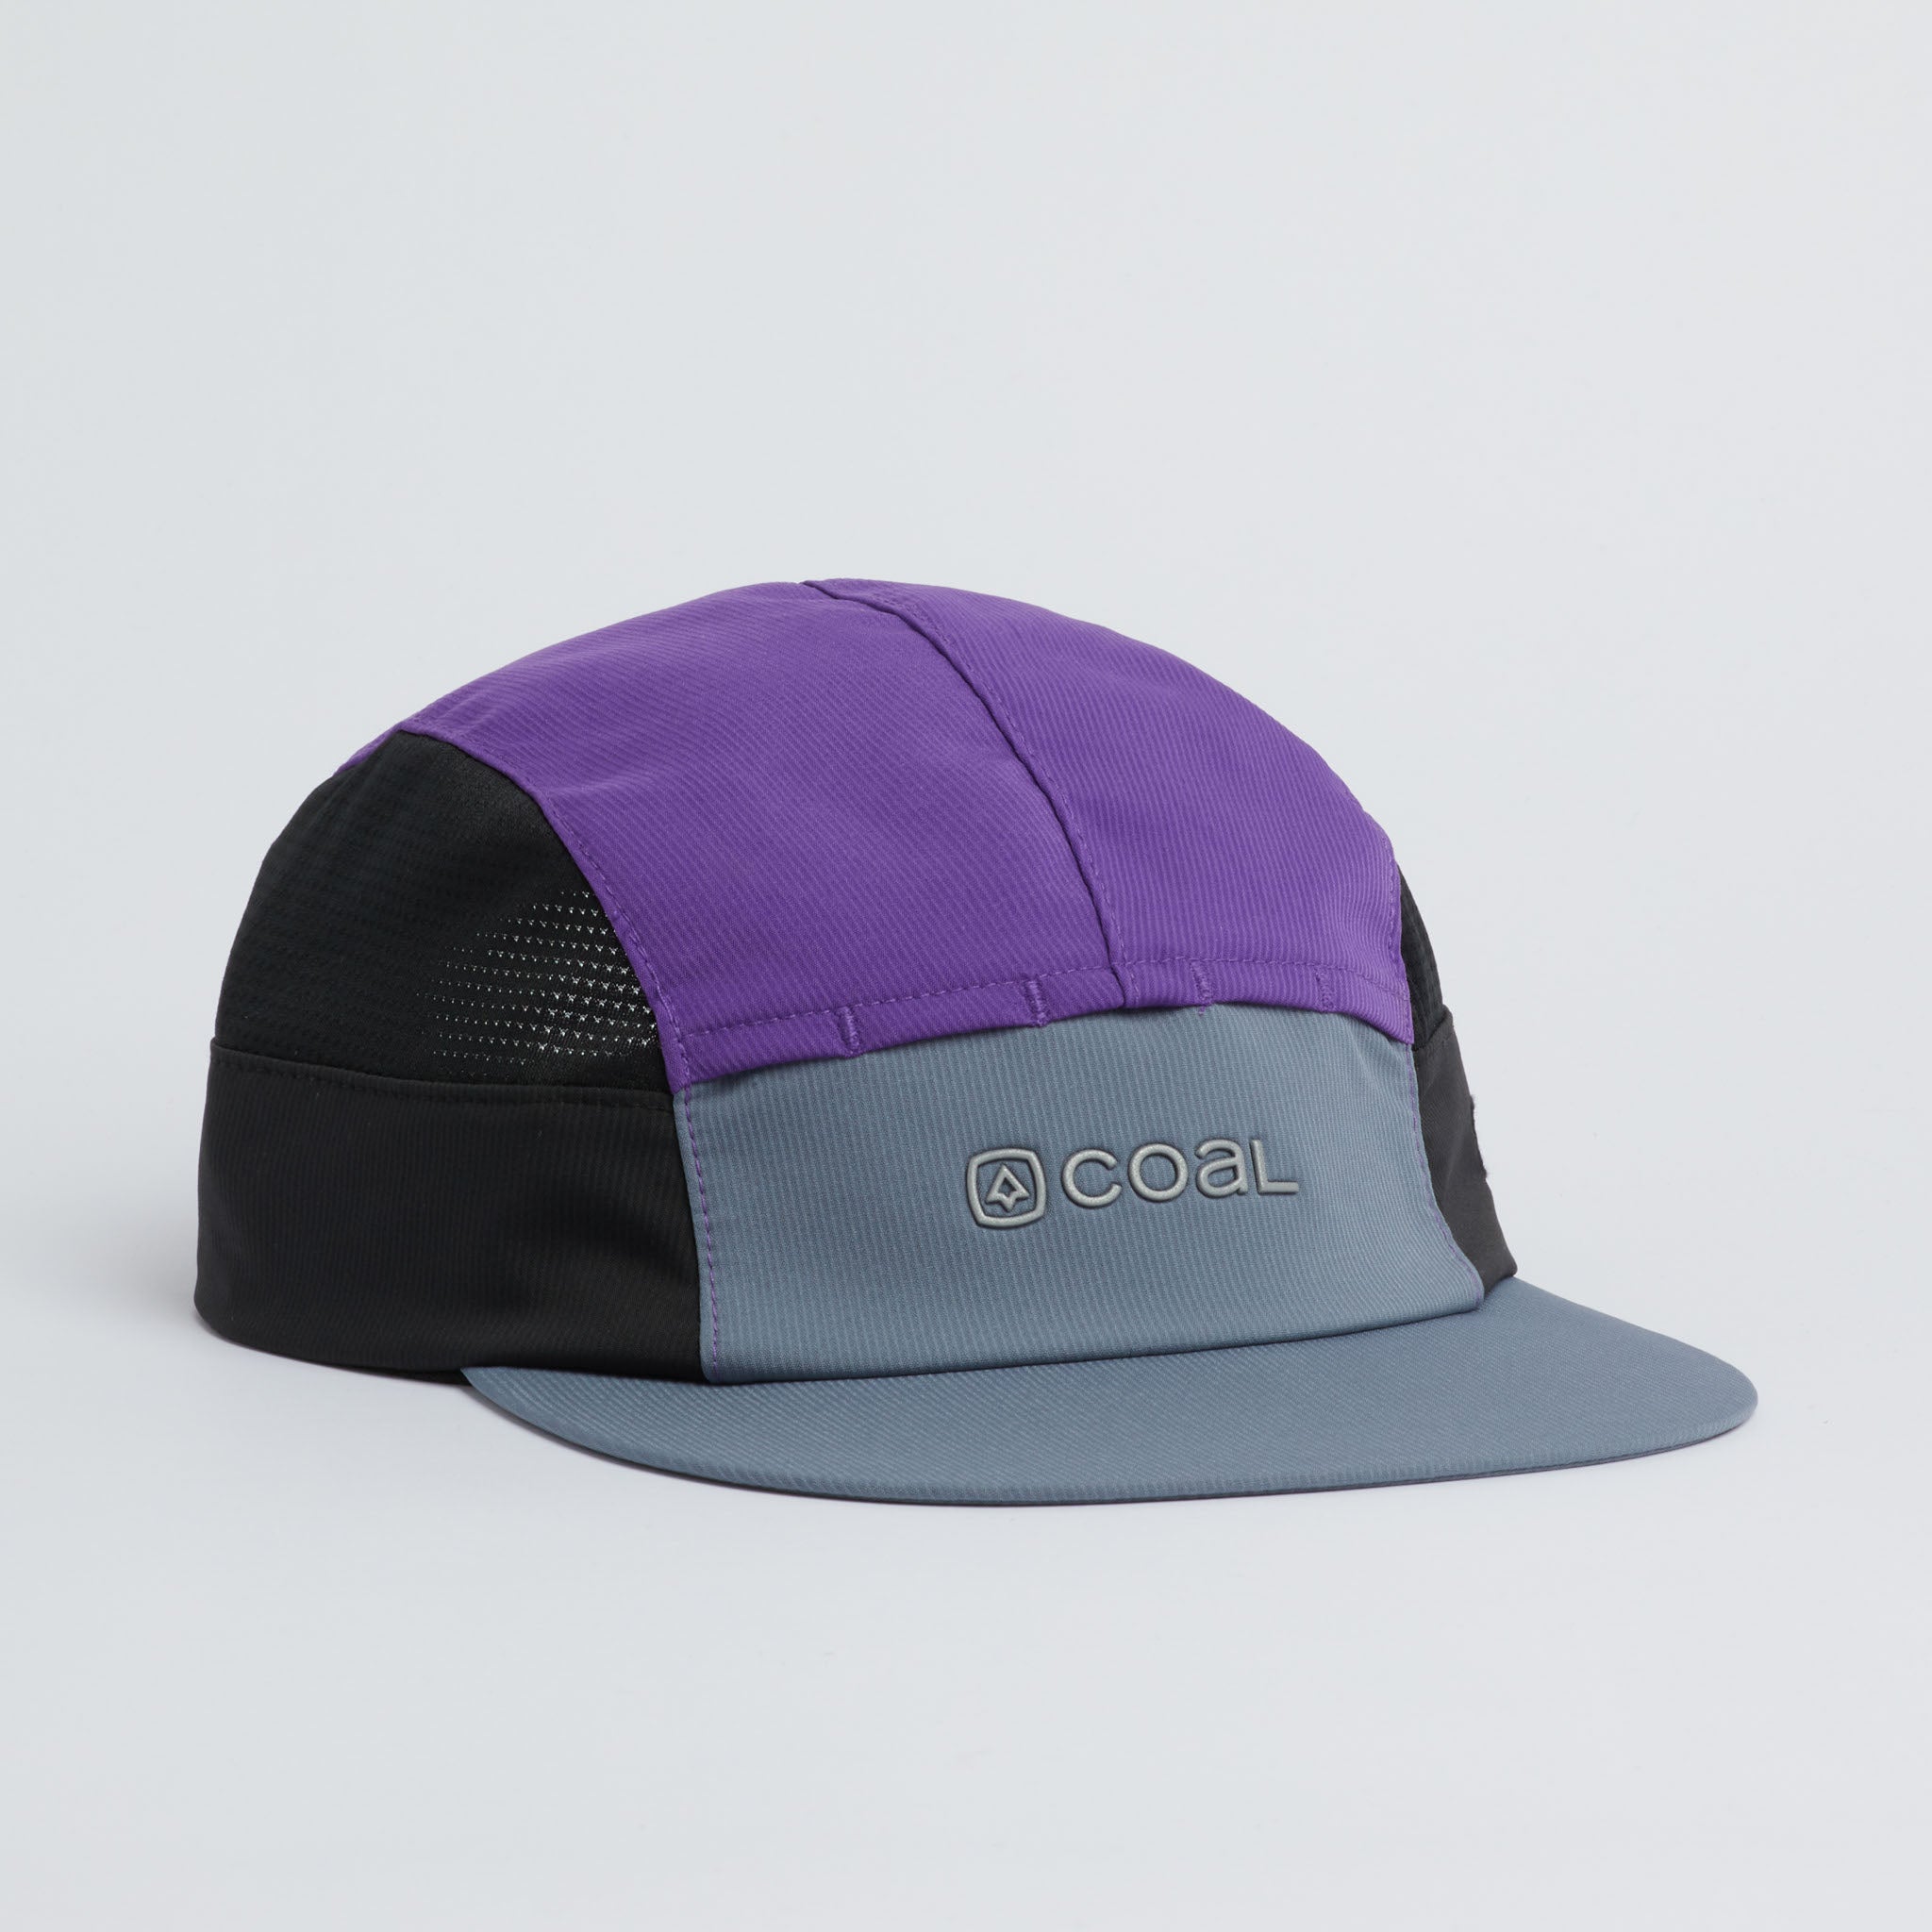 Coal Headwear – The Pines Ultra Low Unstructured Cap